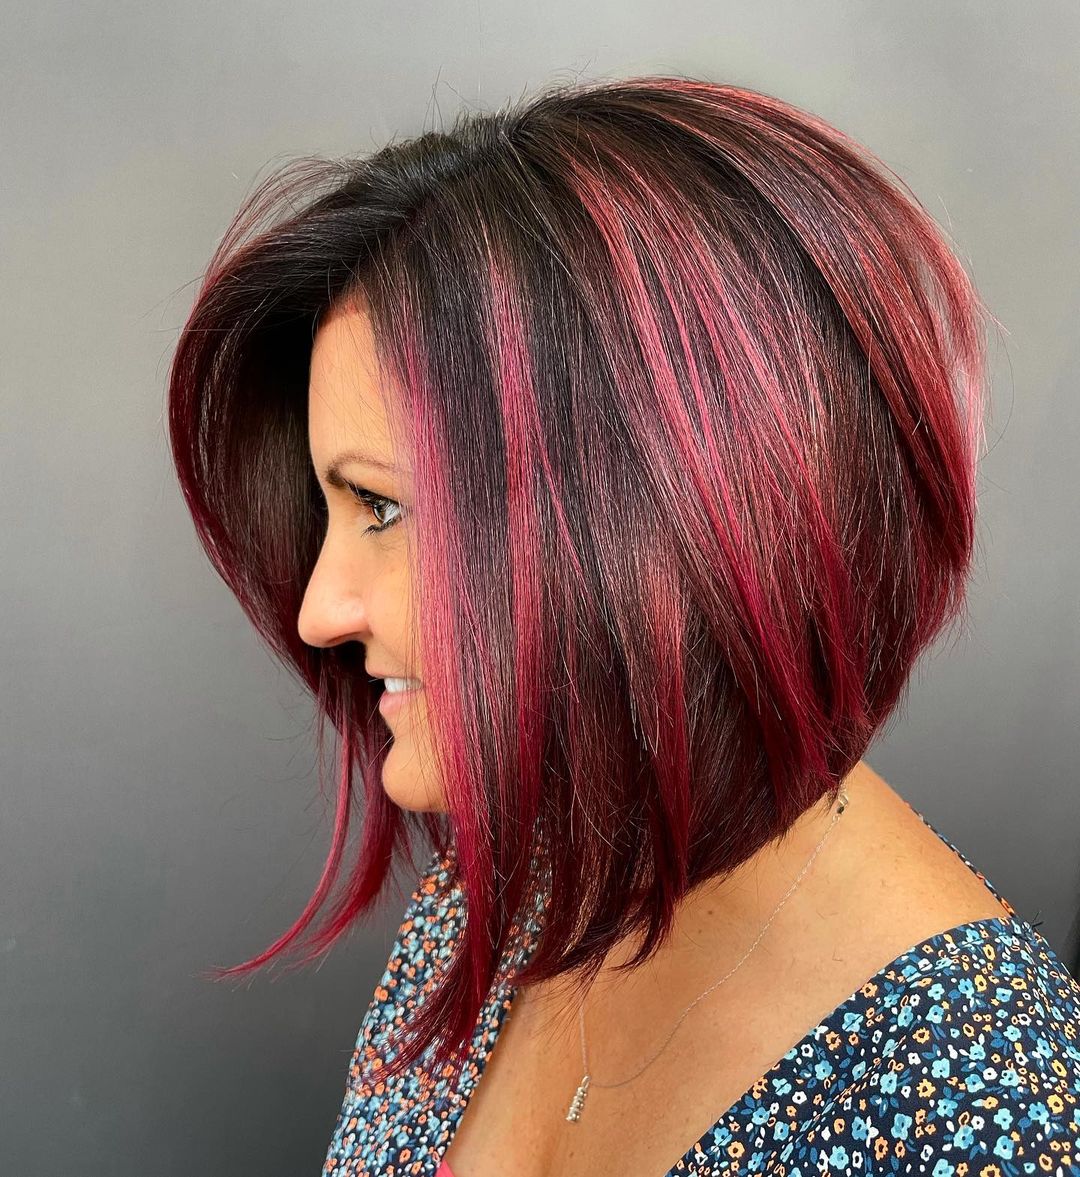 Hair coloring: 30 most popular ways to change your look